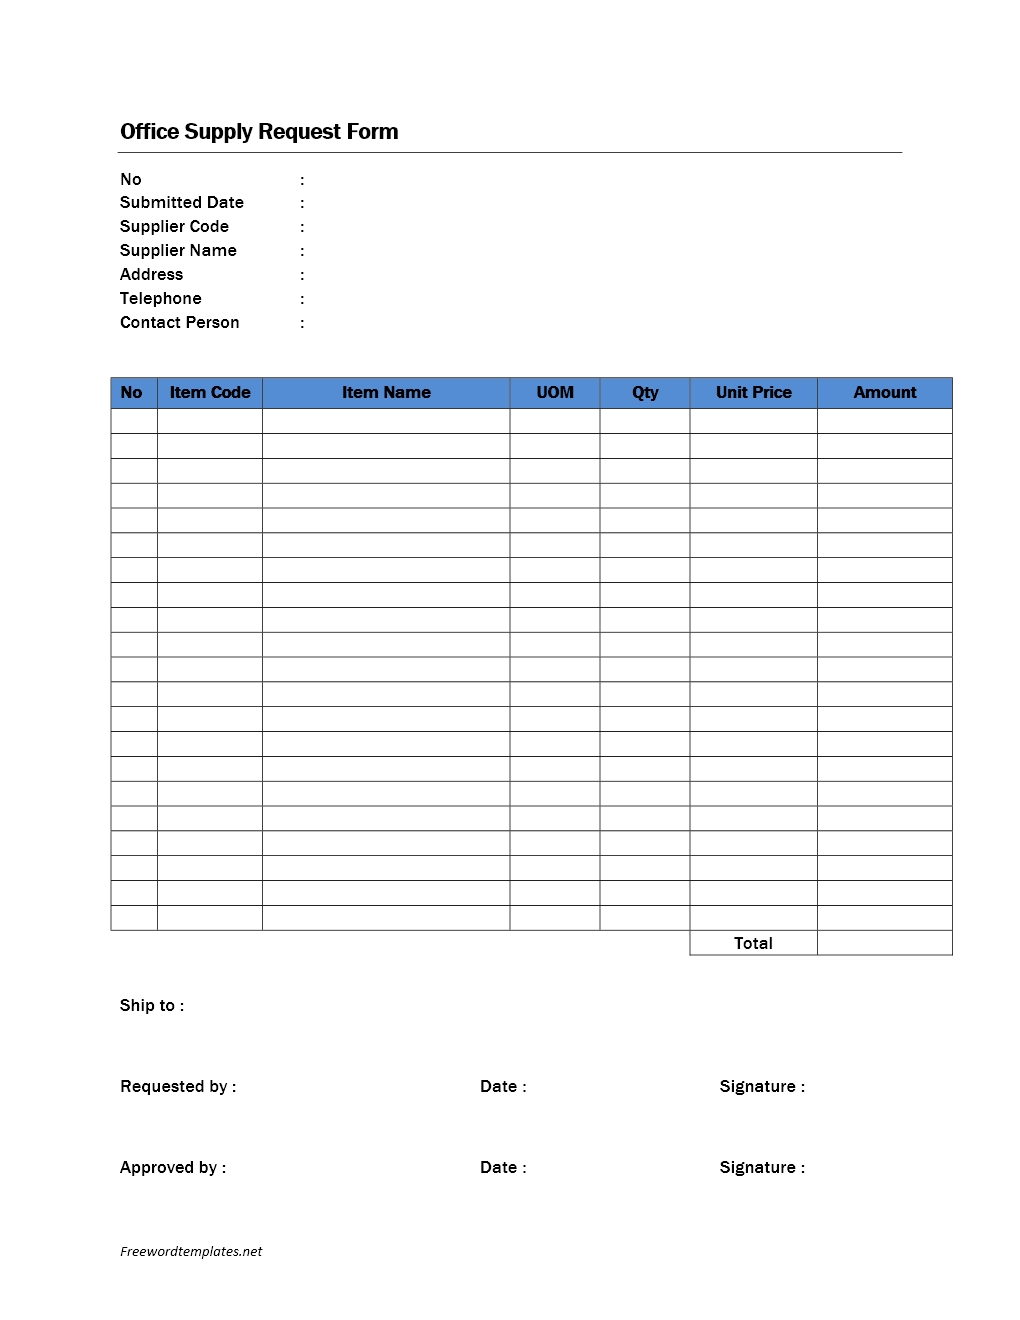 microsoft office purchase order form